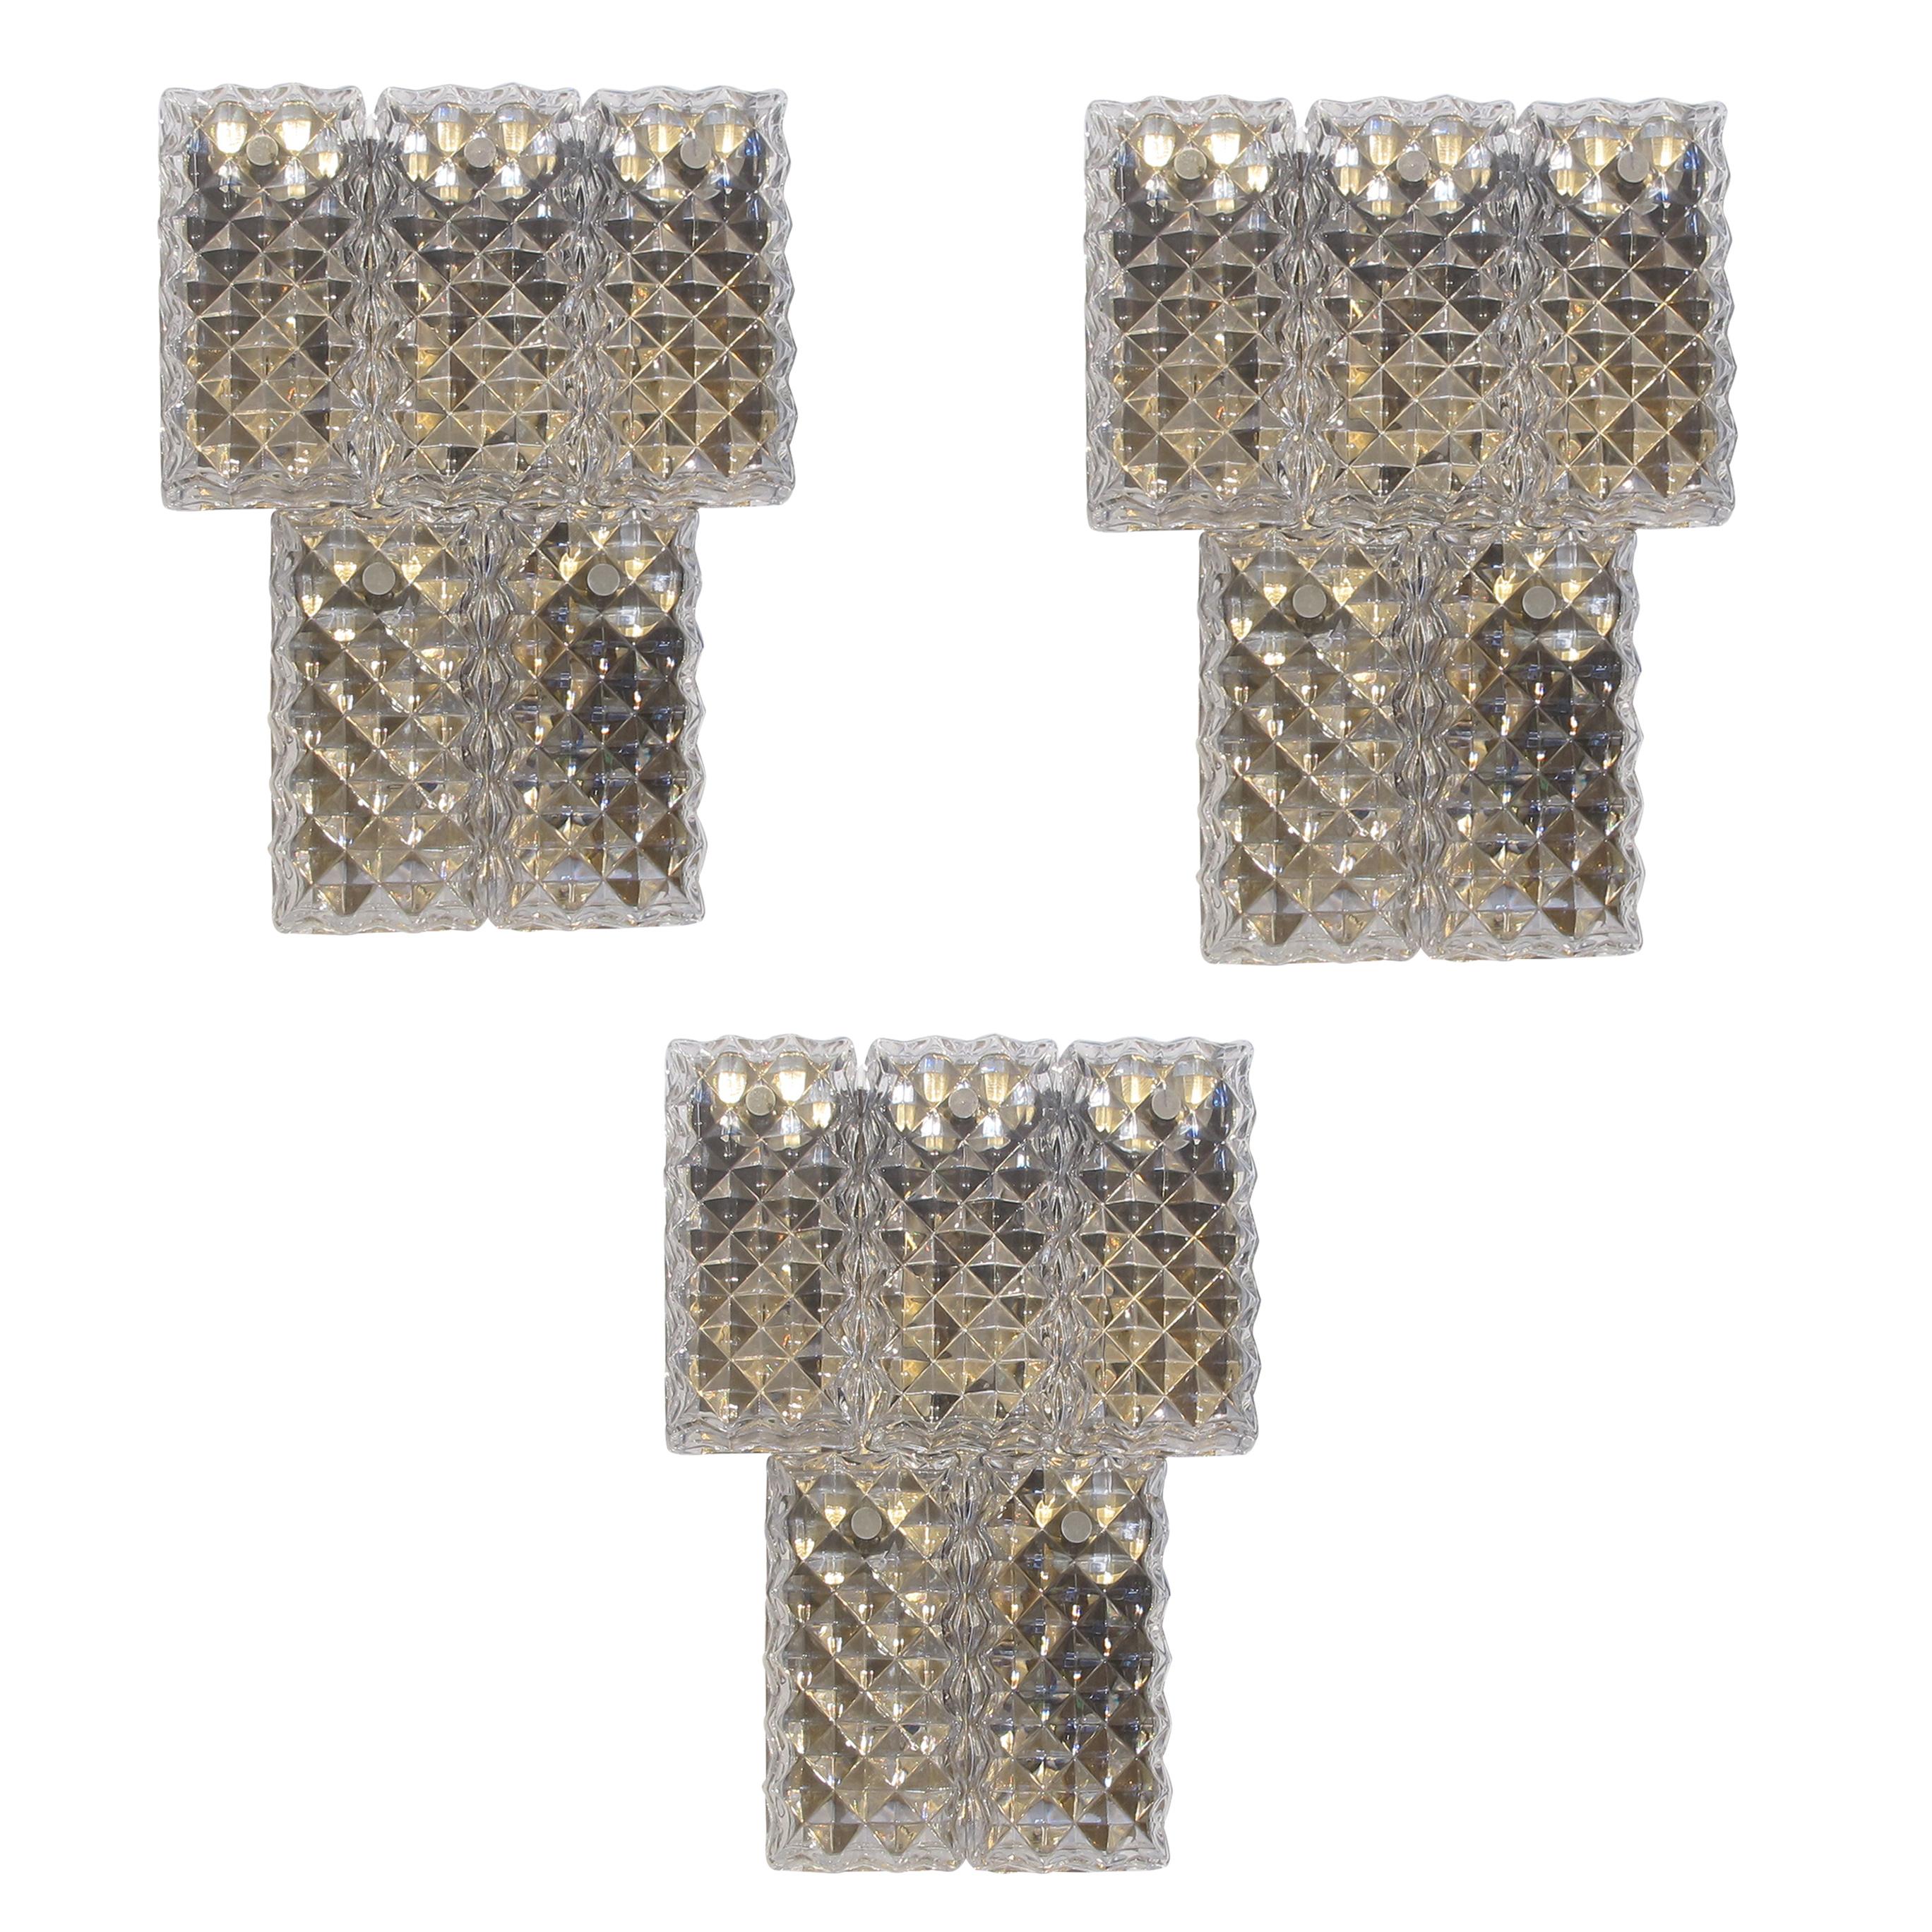 Set of three two-tier Kinkeldey wall lights from the retro period, 1960s. Crafted with meticulous attention to detail, each light features textured glass plates with prism shapes to refract the light. Each wall light holds four panes of glass held